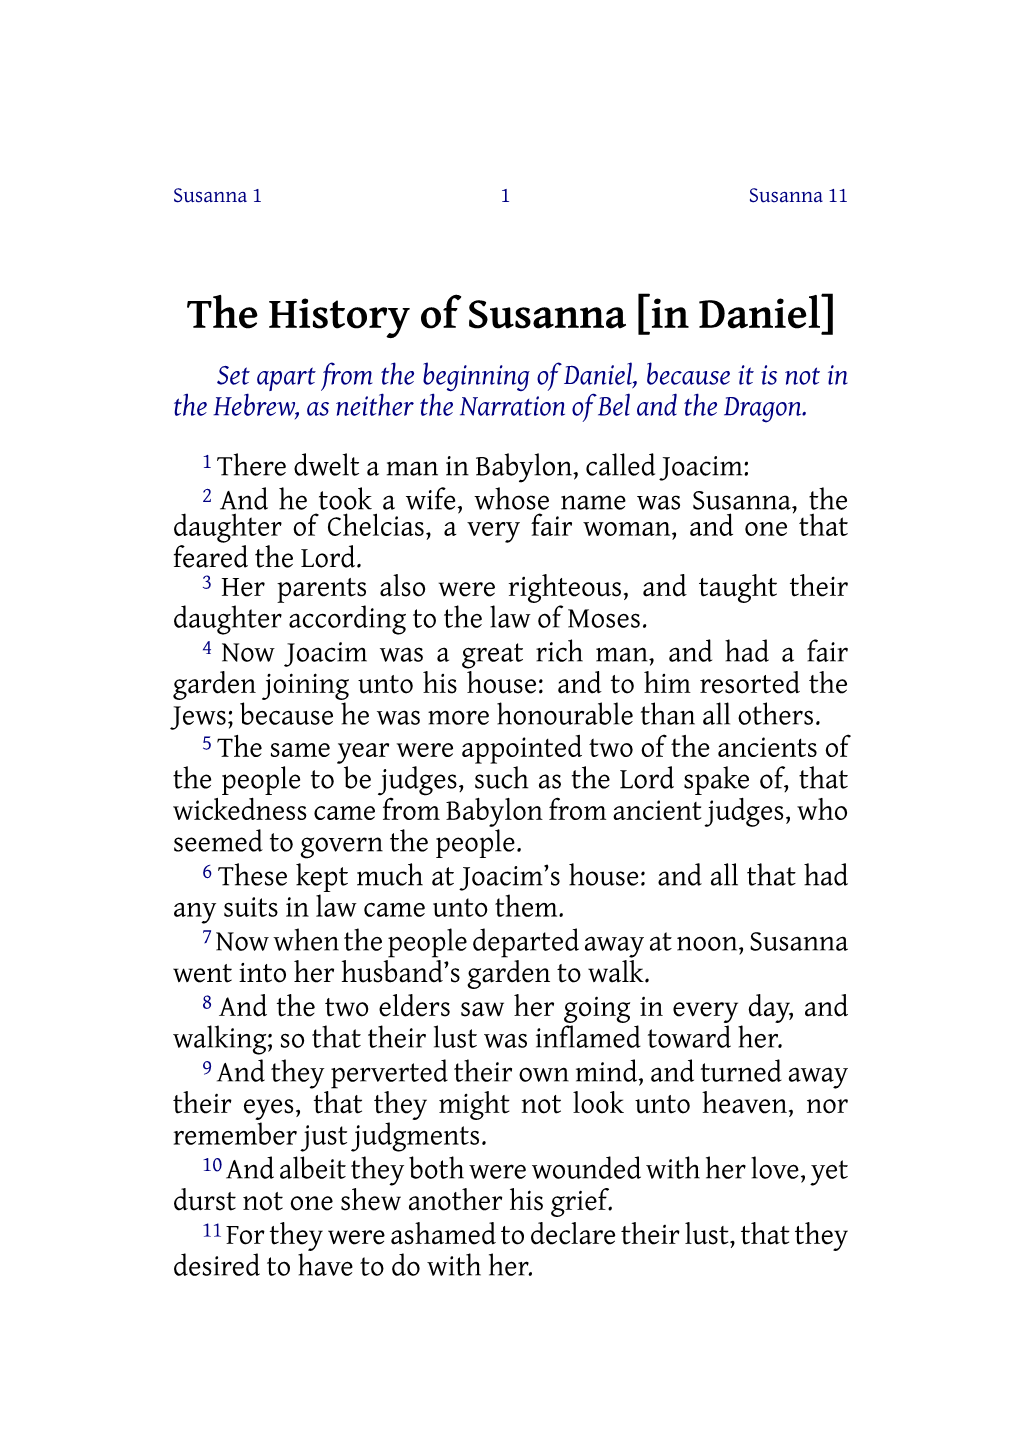 The History of Susanna [In Daniel] Set Apart from the Beginning of Daniel, Because It Is Not in the Hebrew, As Neither the Narration of Bel and the Dragon